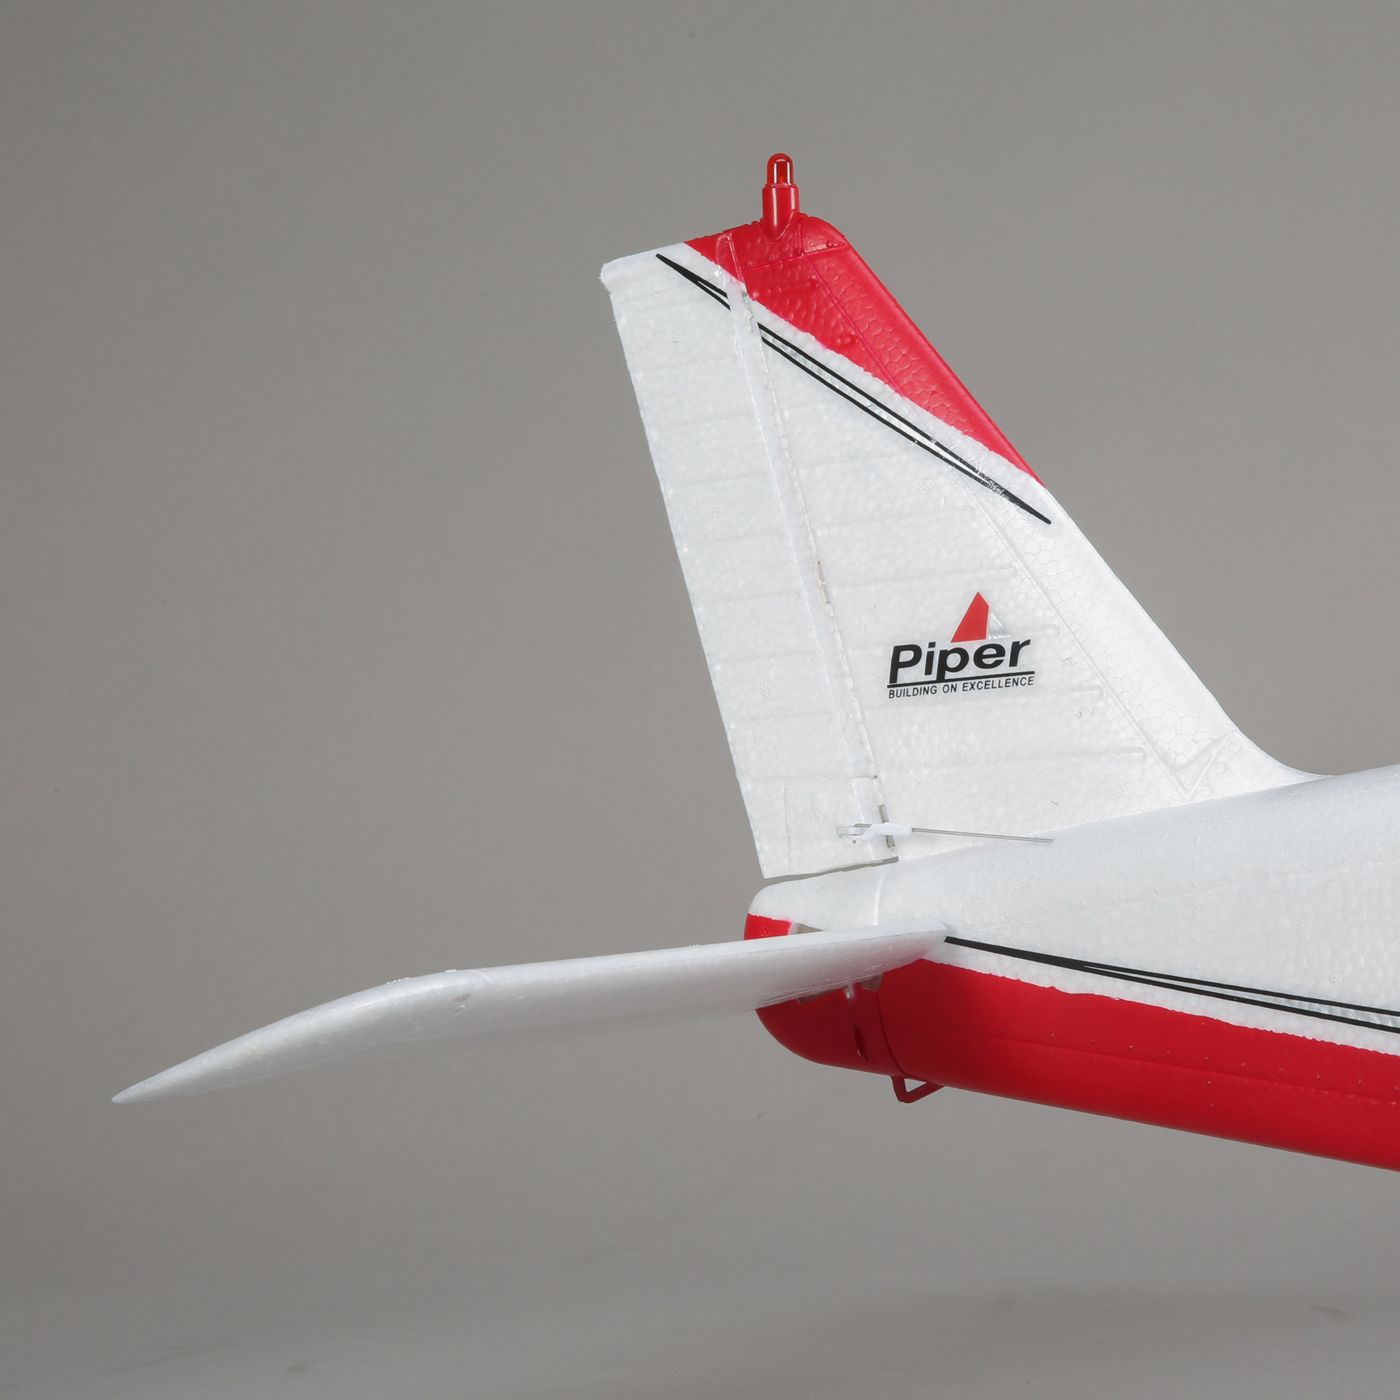 E-Flite Cherokee 1.3m BNF Basic with AS3X and SAFE Select EFL54500